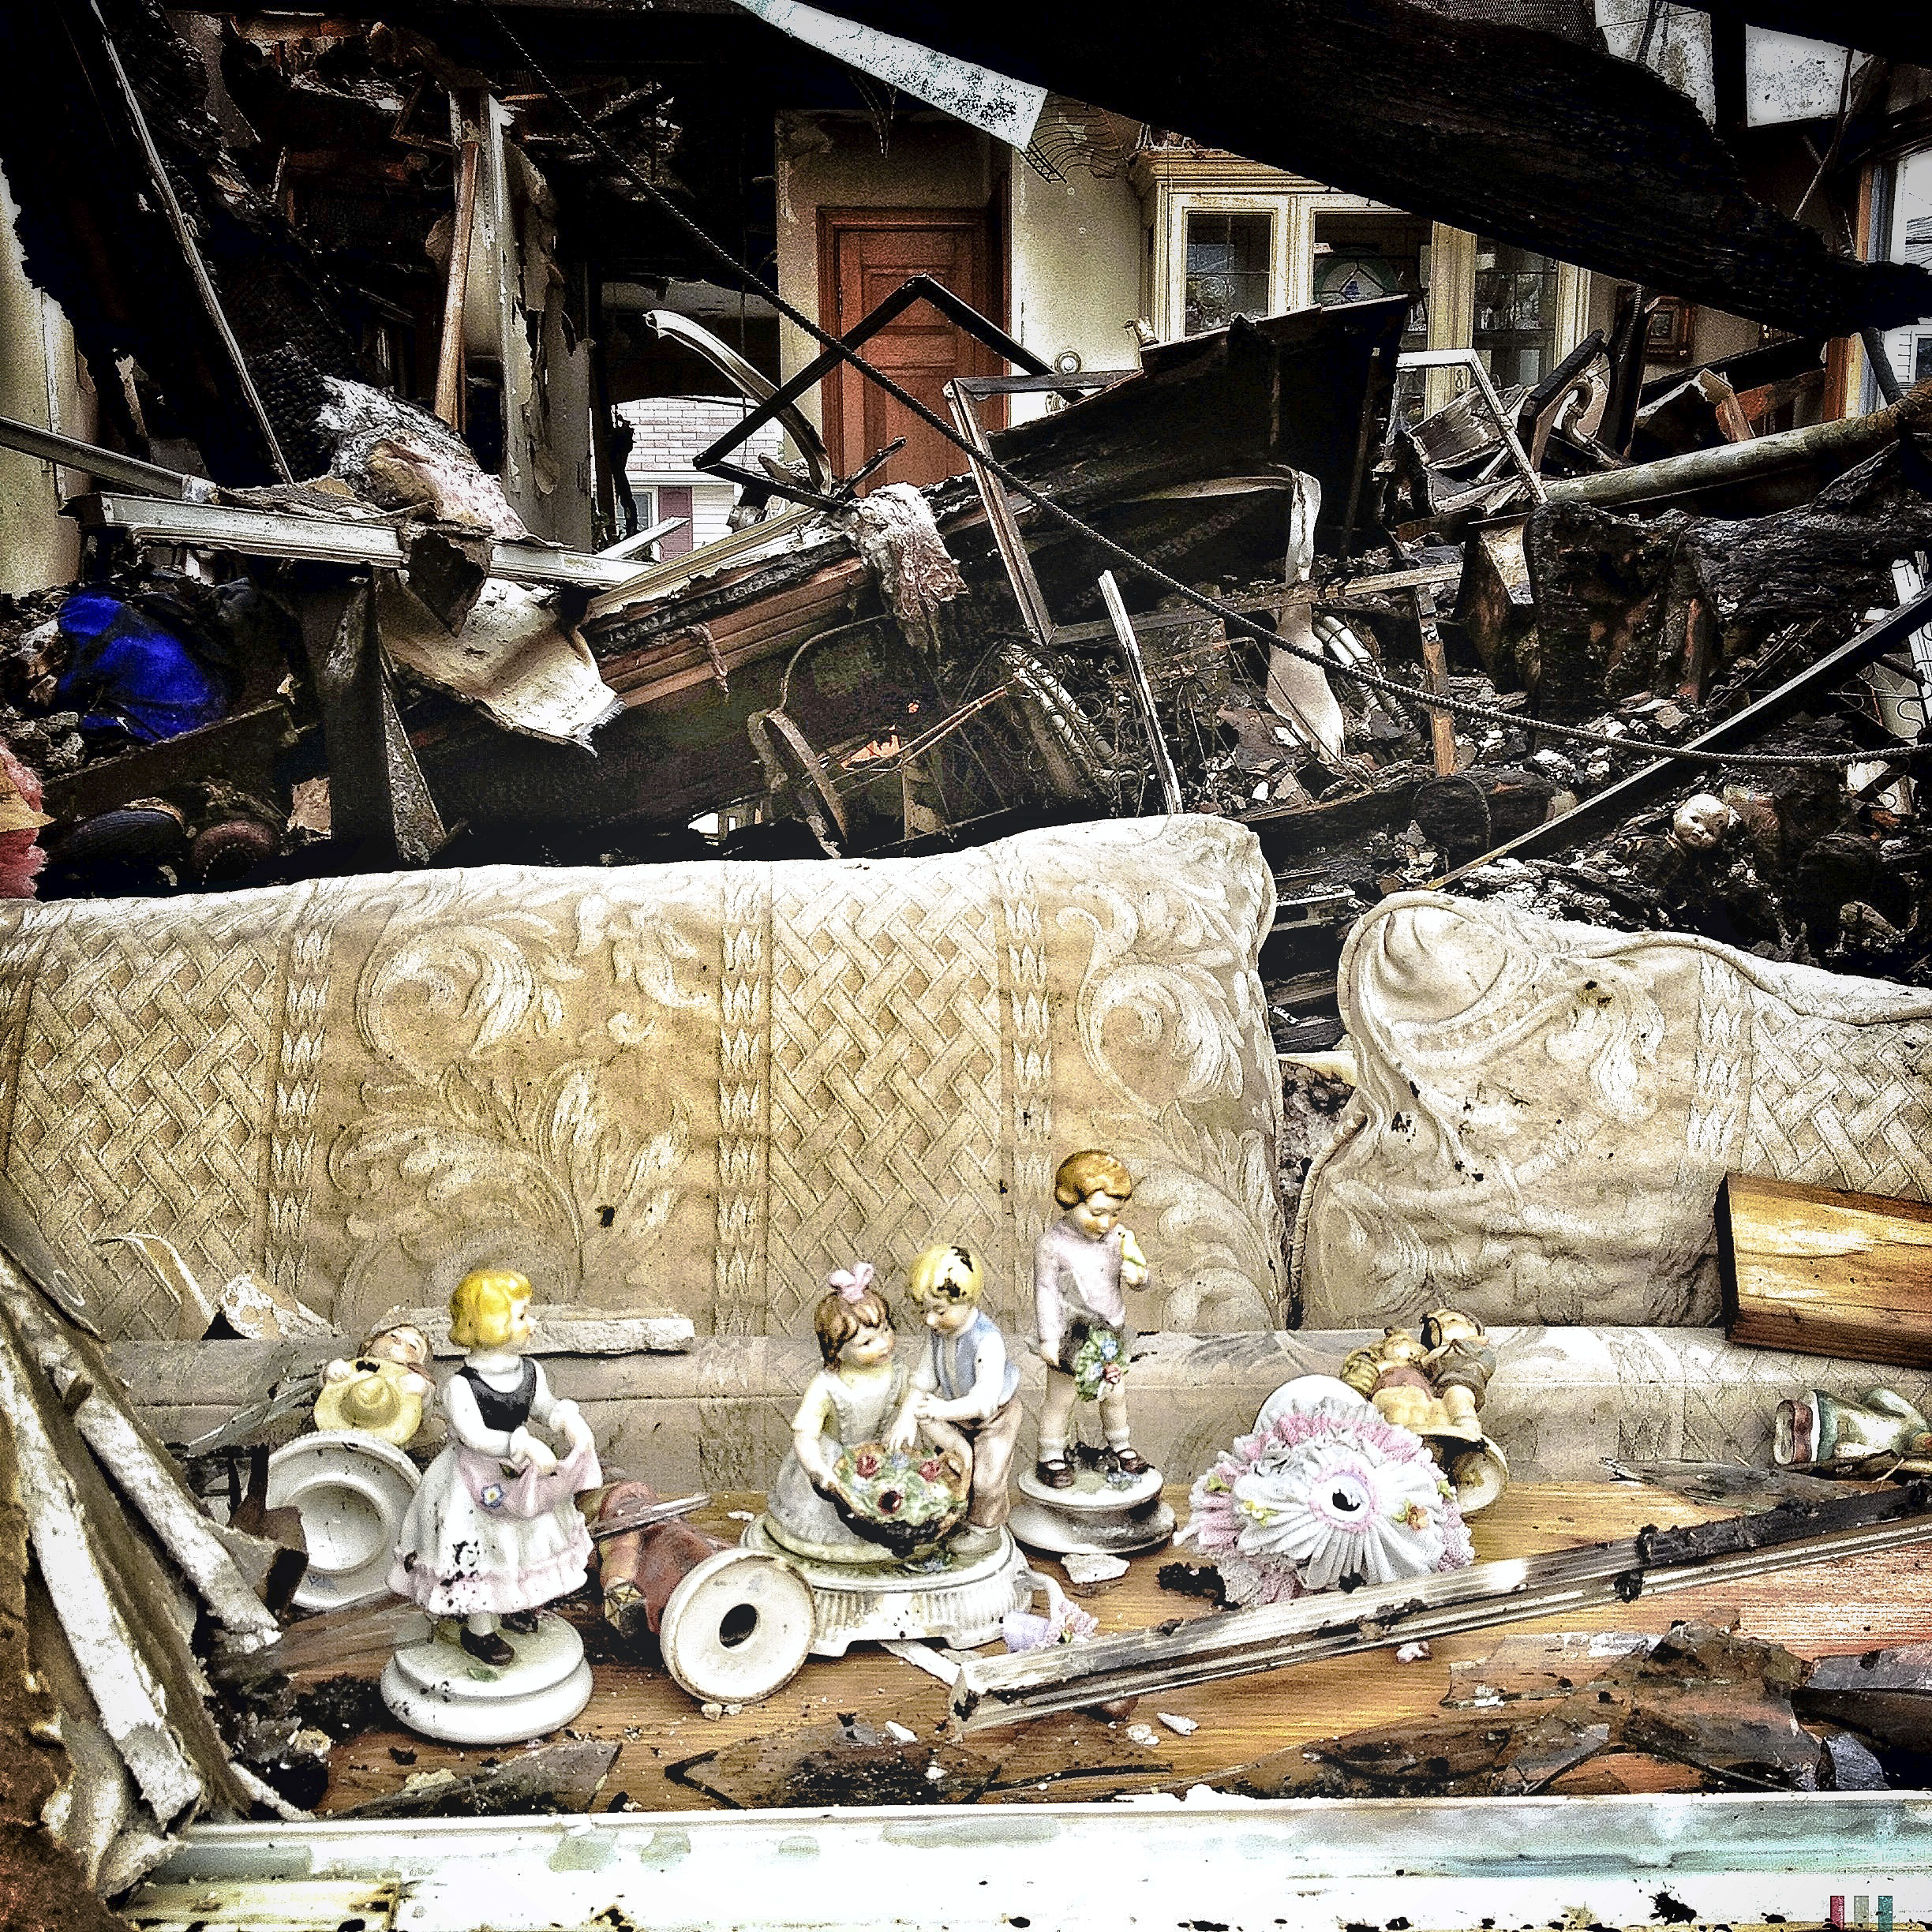 Remnants of a home in the Breezy Point area of Queens are displaced and re-arranged on a sofa after hurricane Sandy tore through the seaside community.